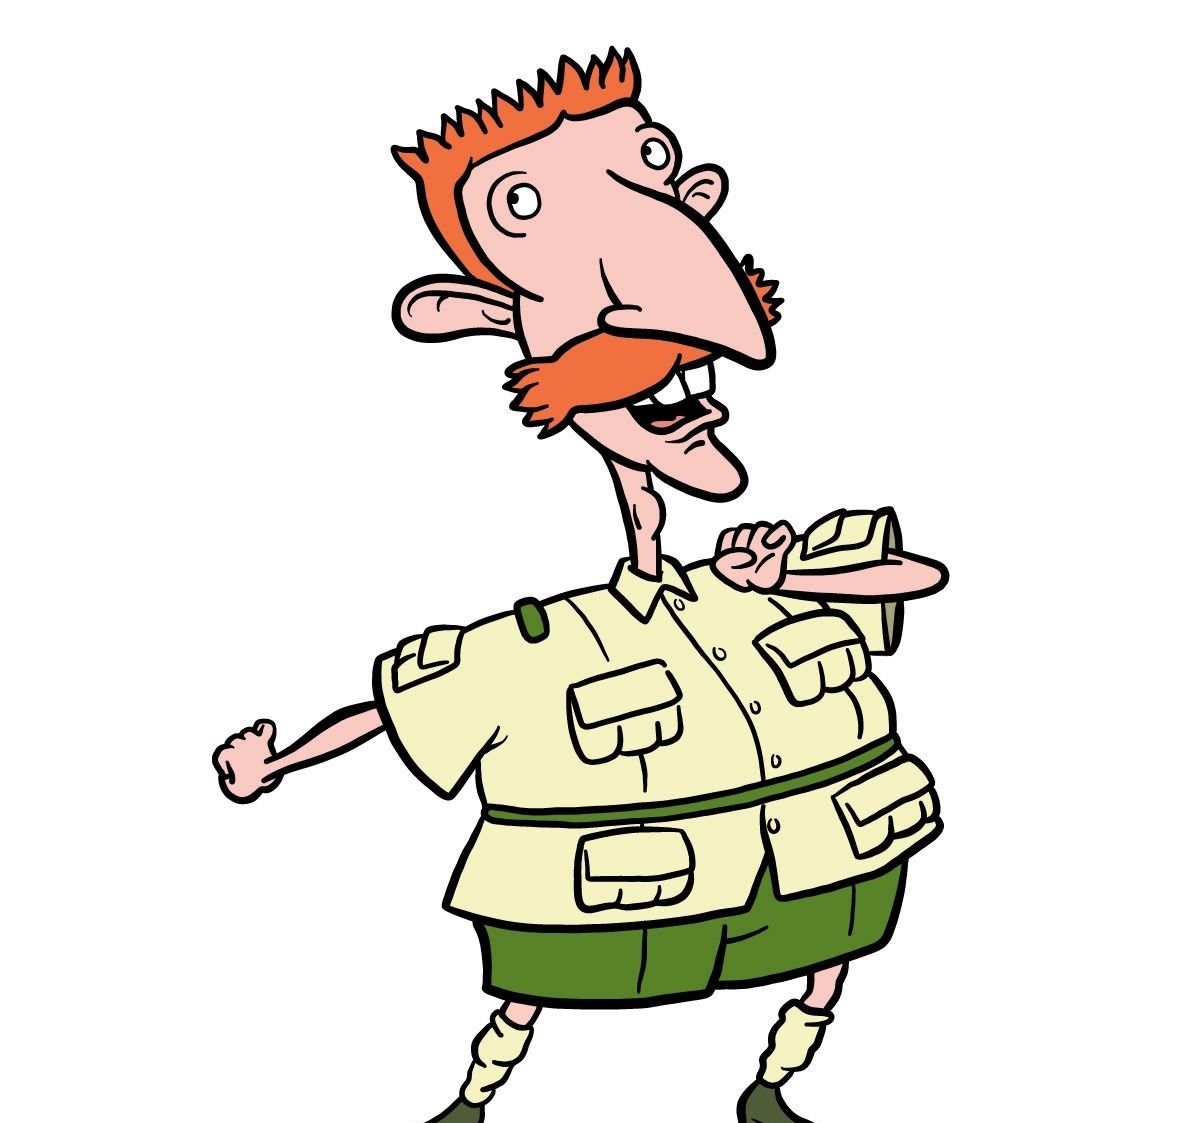 11-facts-about-nigel-thornberry-the-wild-thornberrys